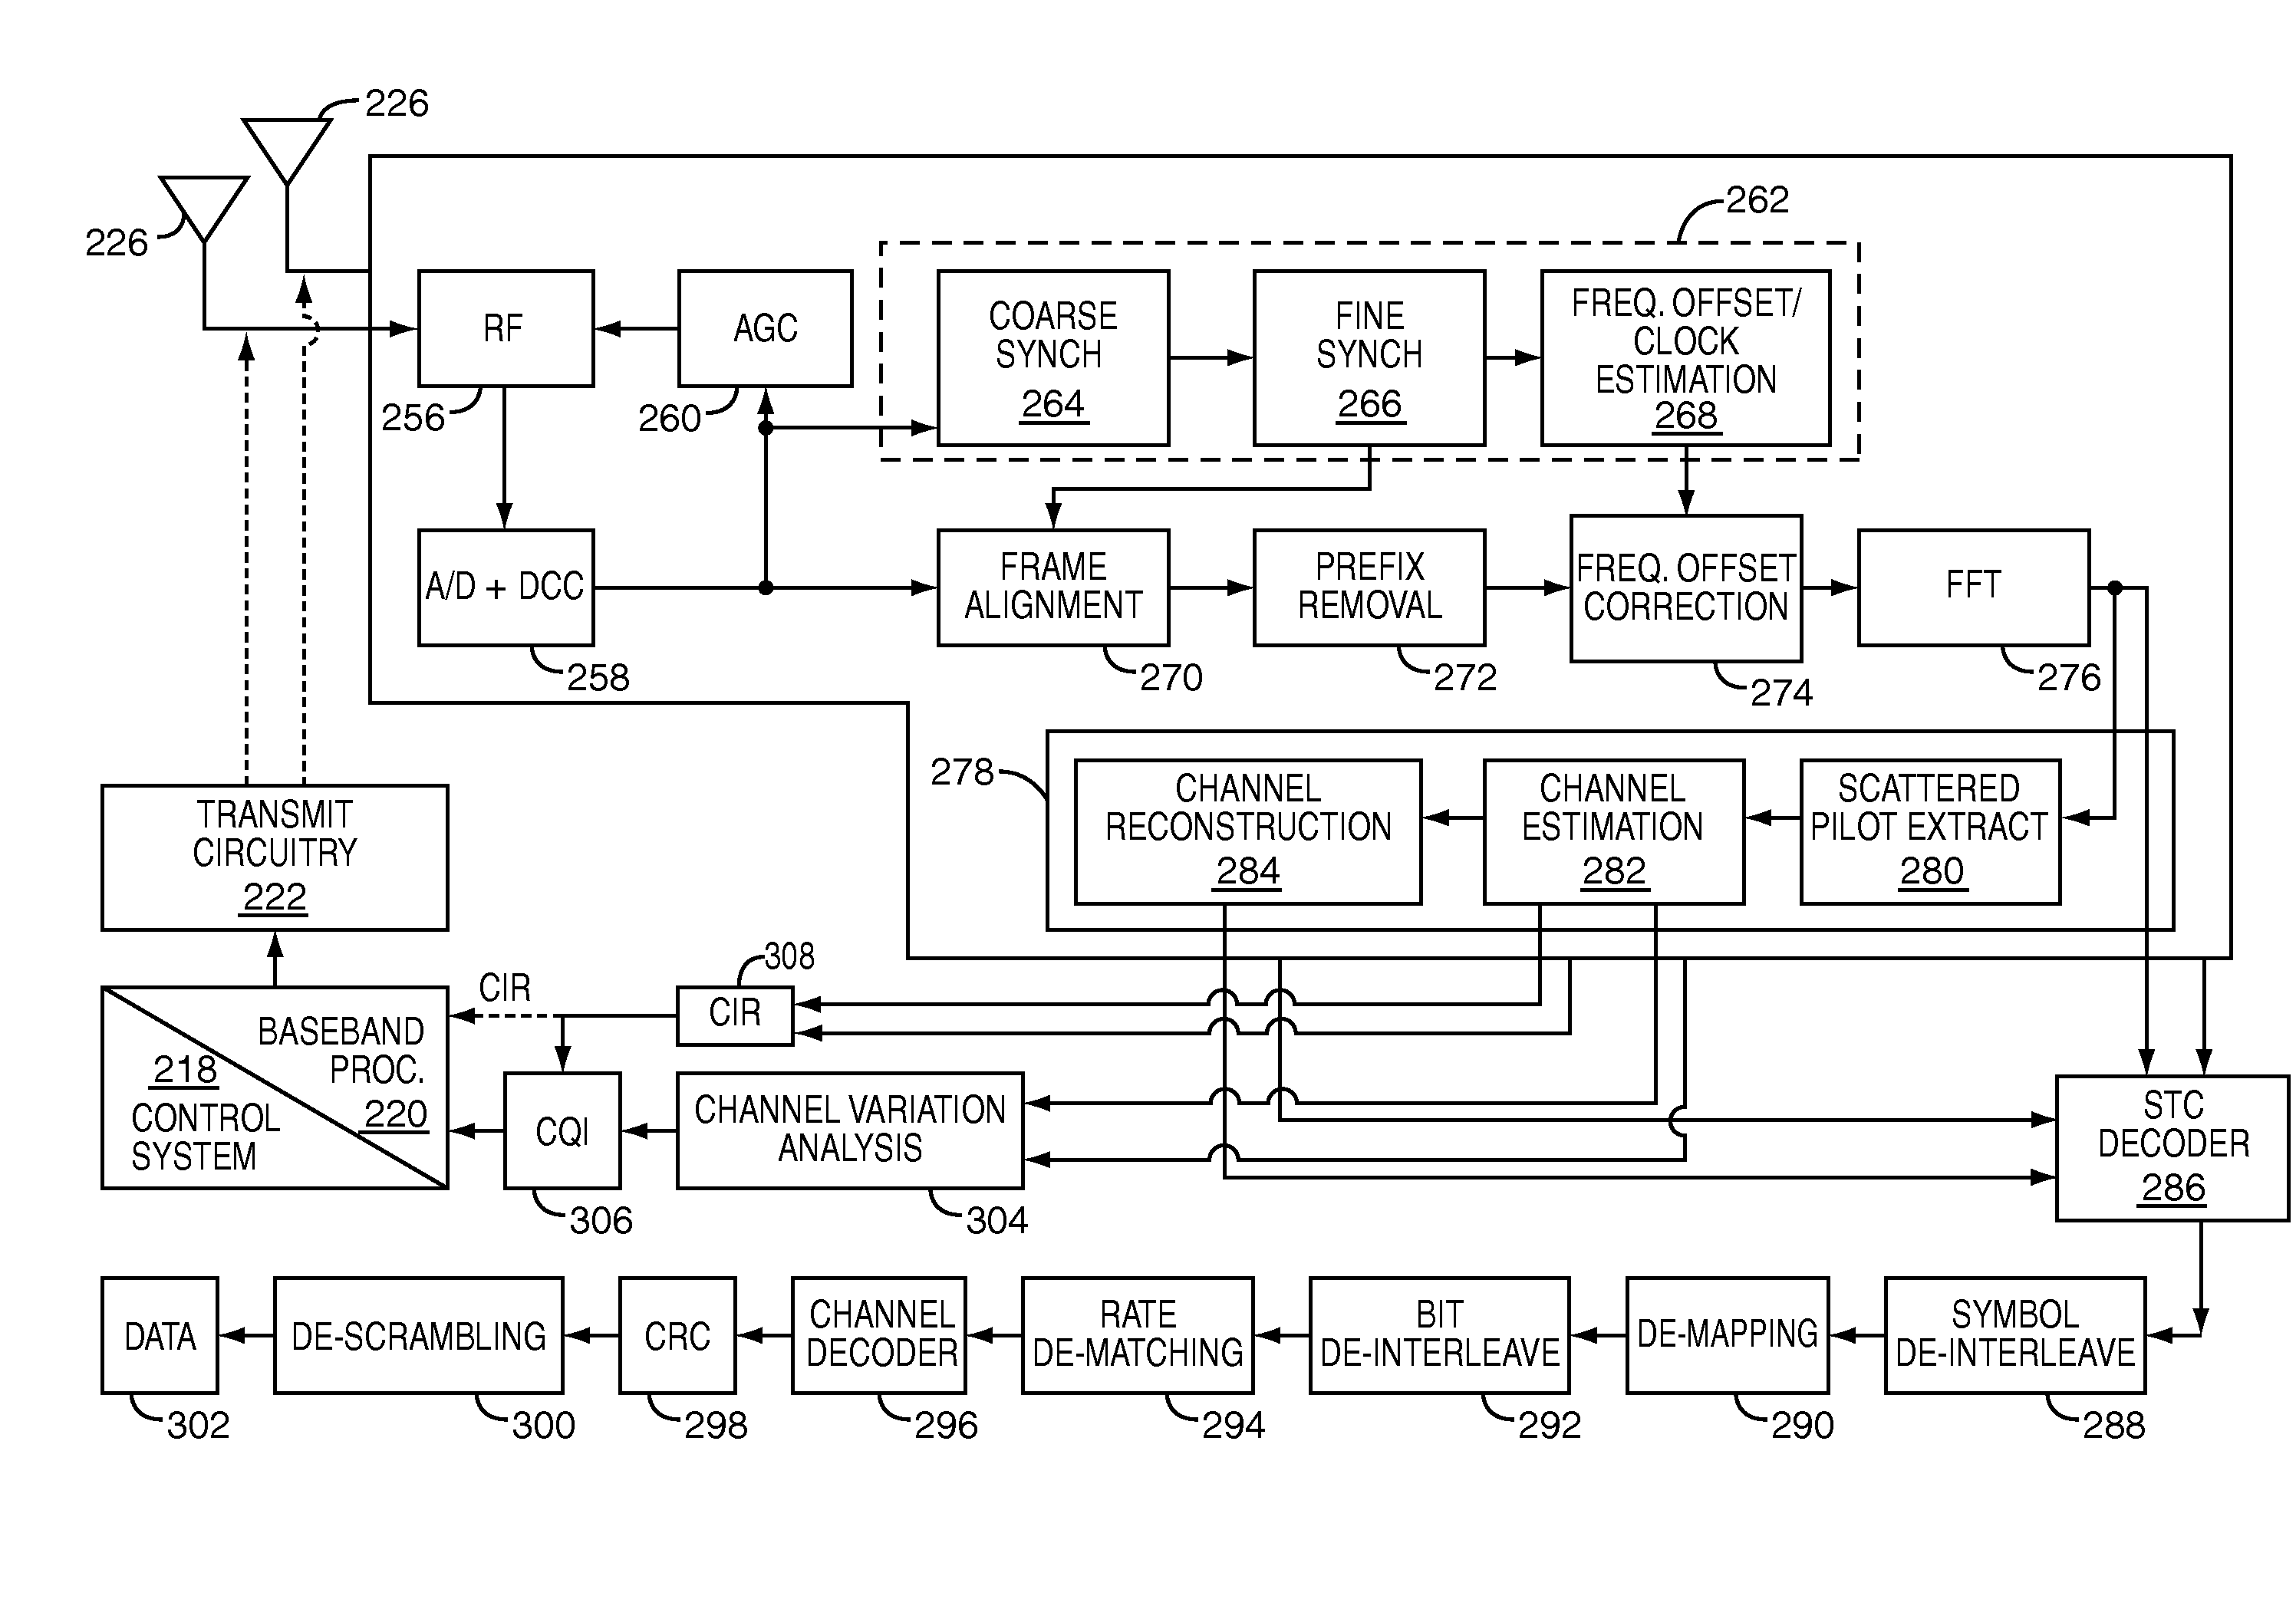 Processing differentiated hierarchical modulation used in radio frequency communications